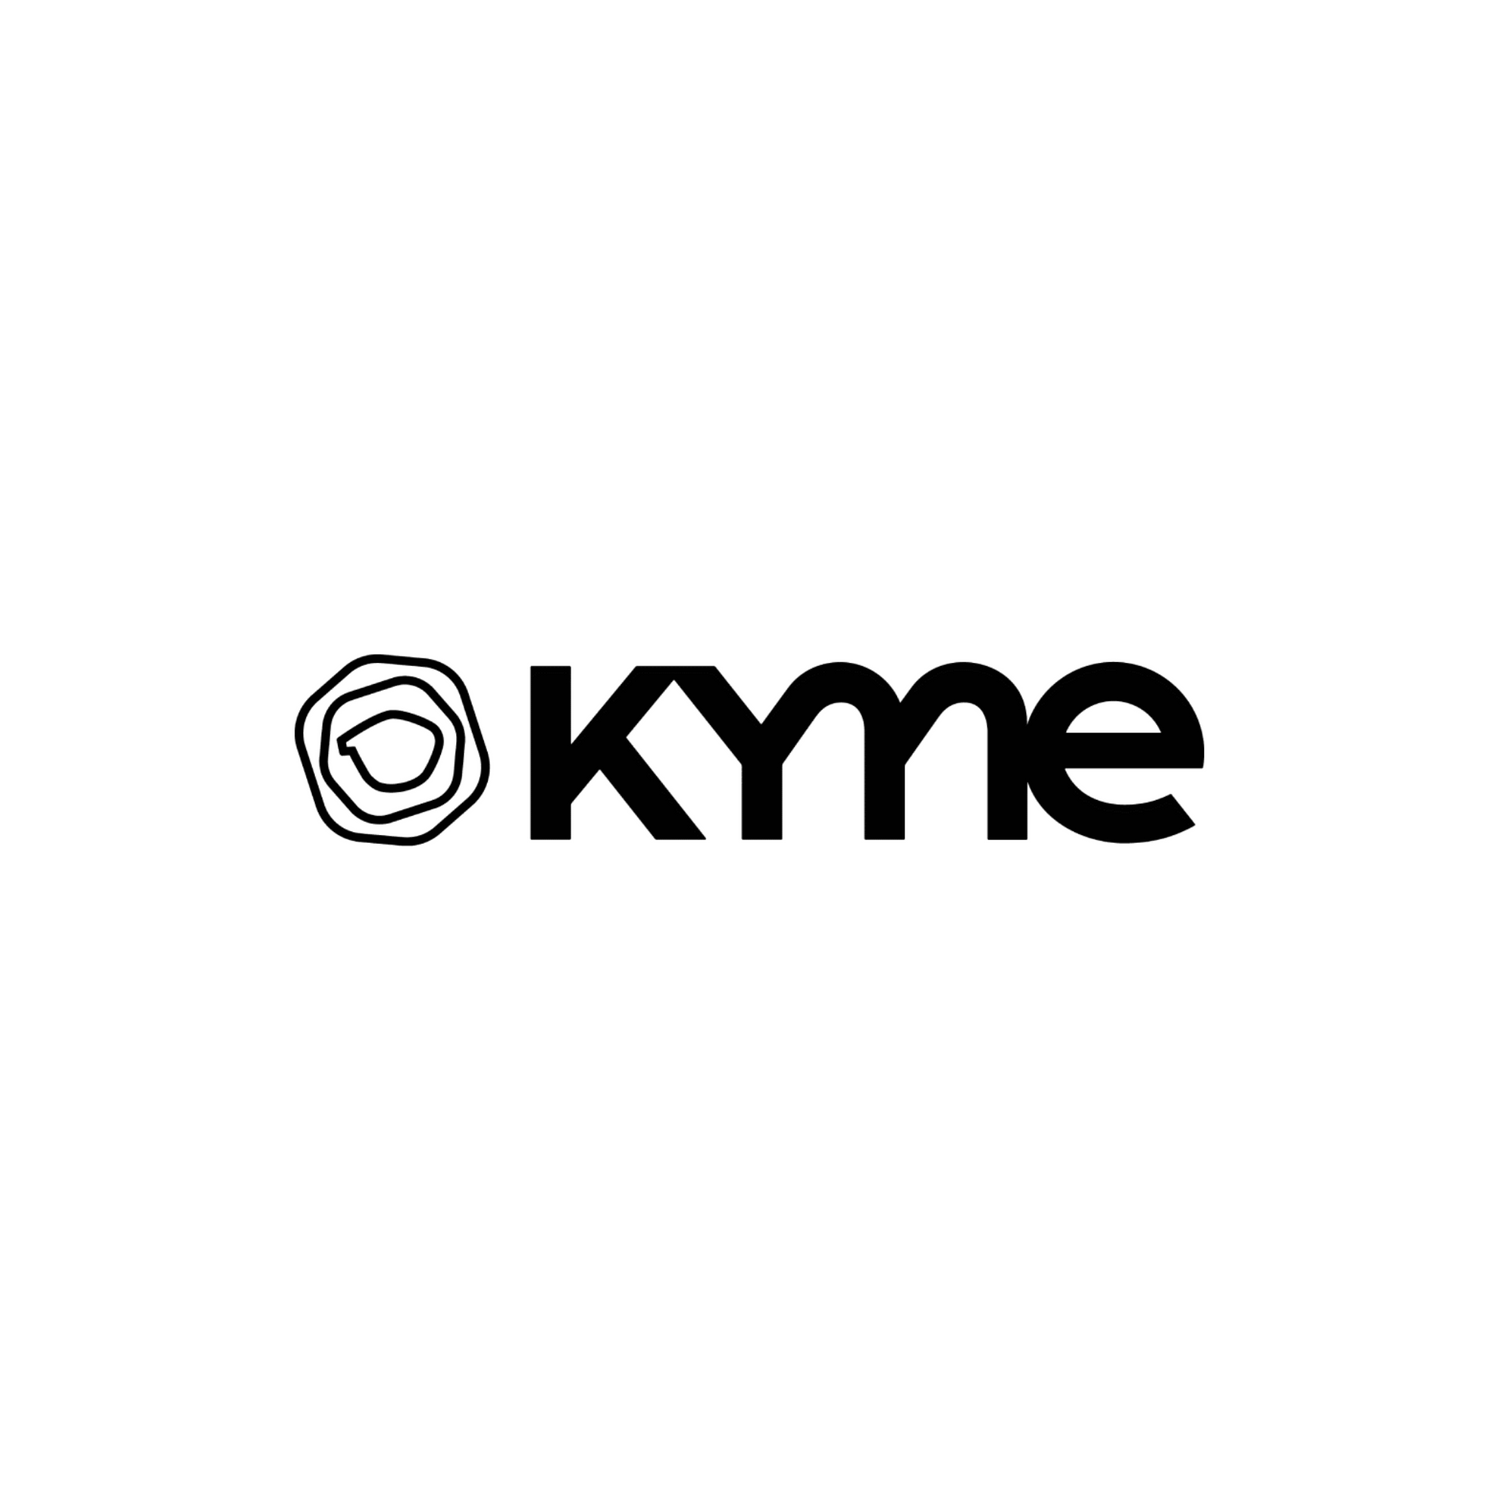 Kyme sunglasses on Spectaclo